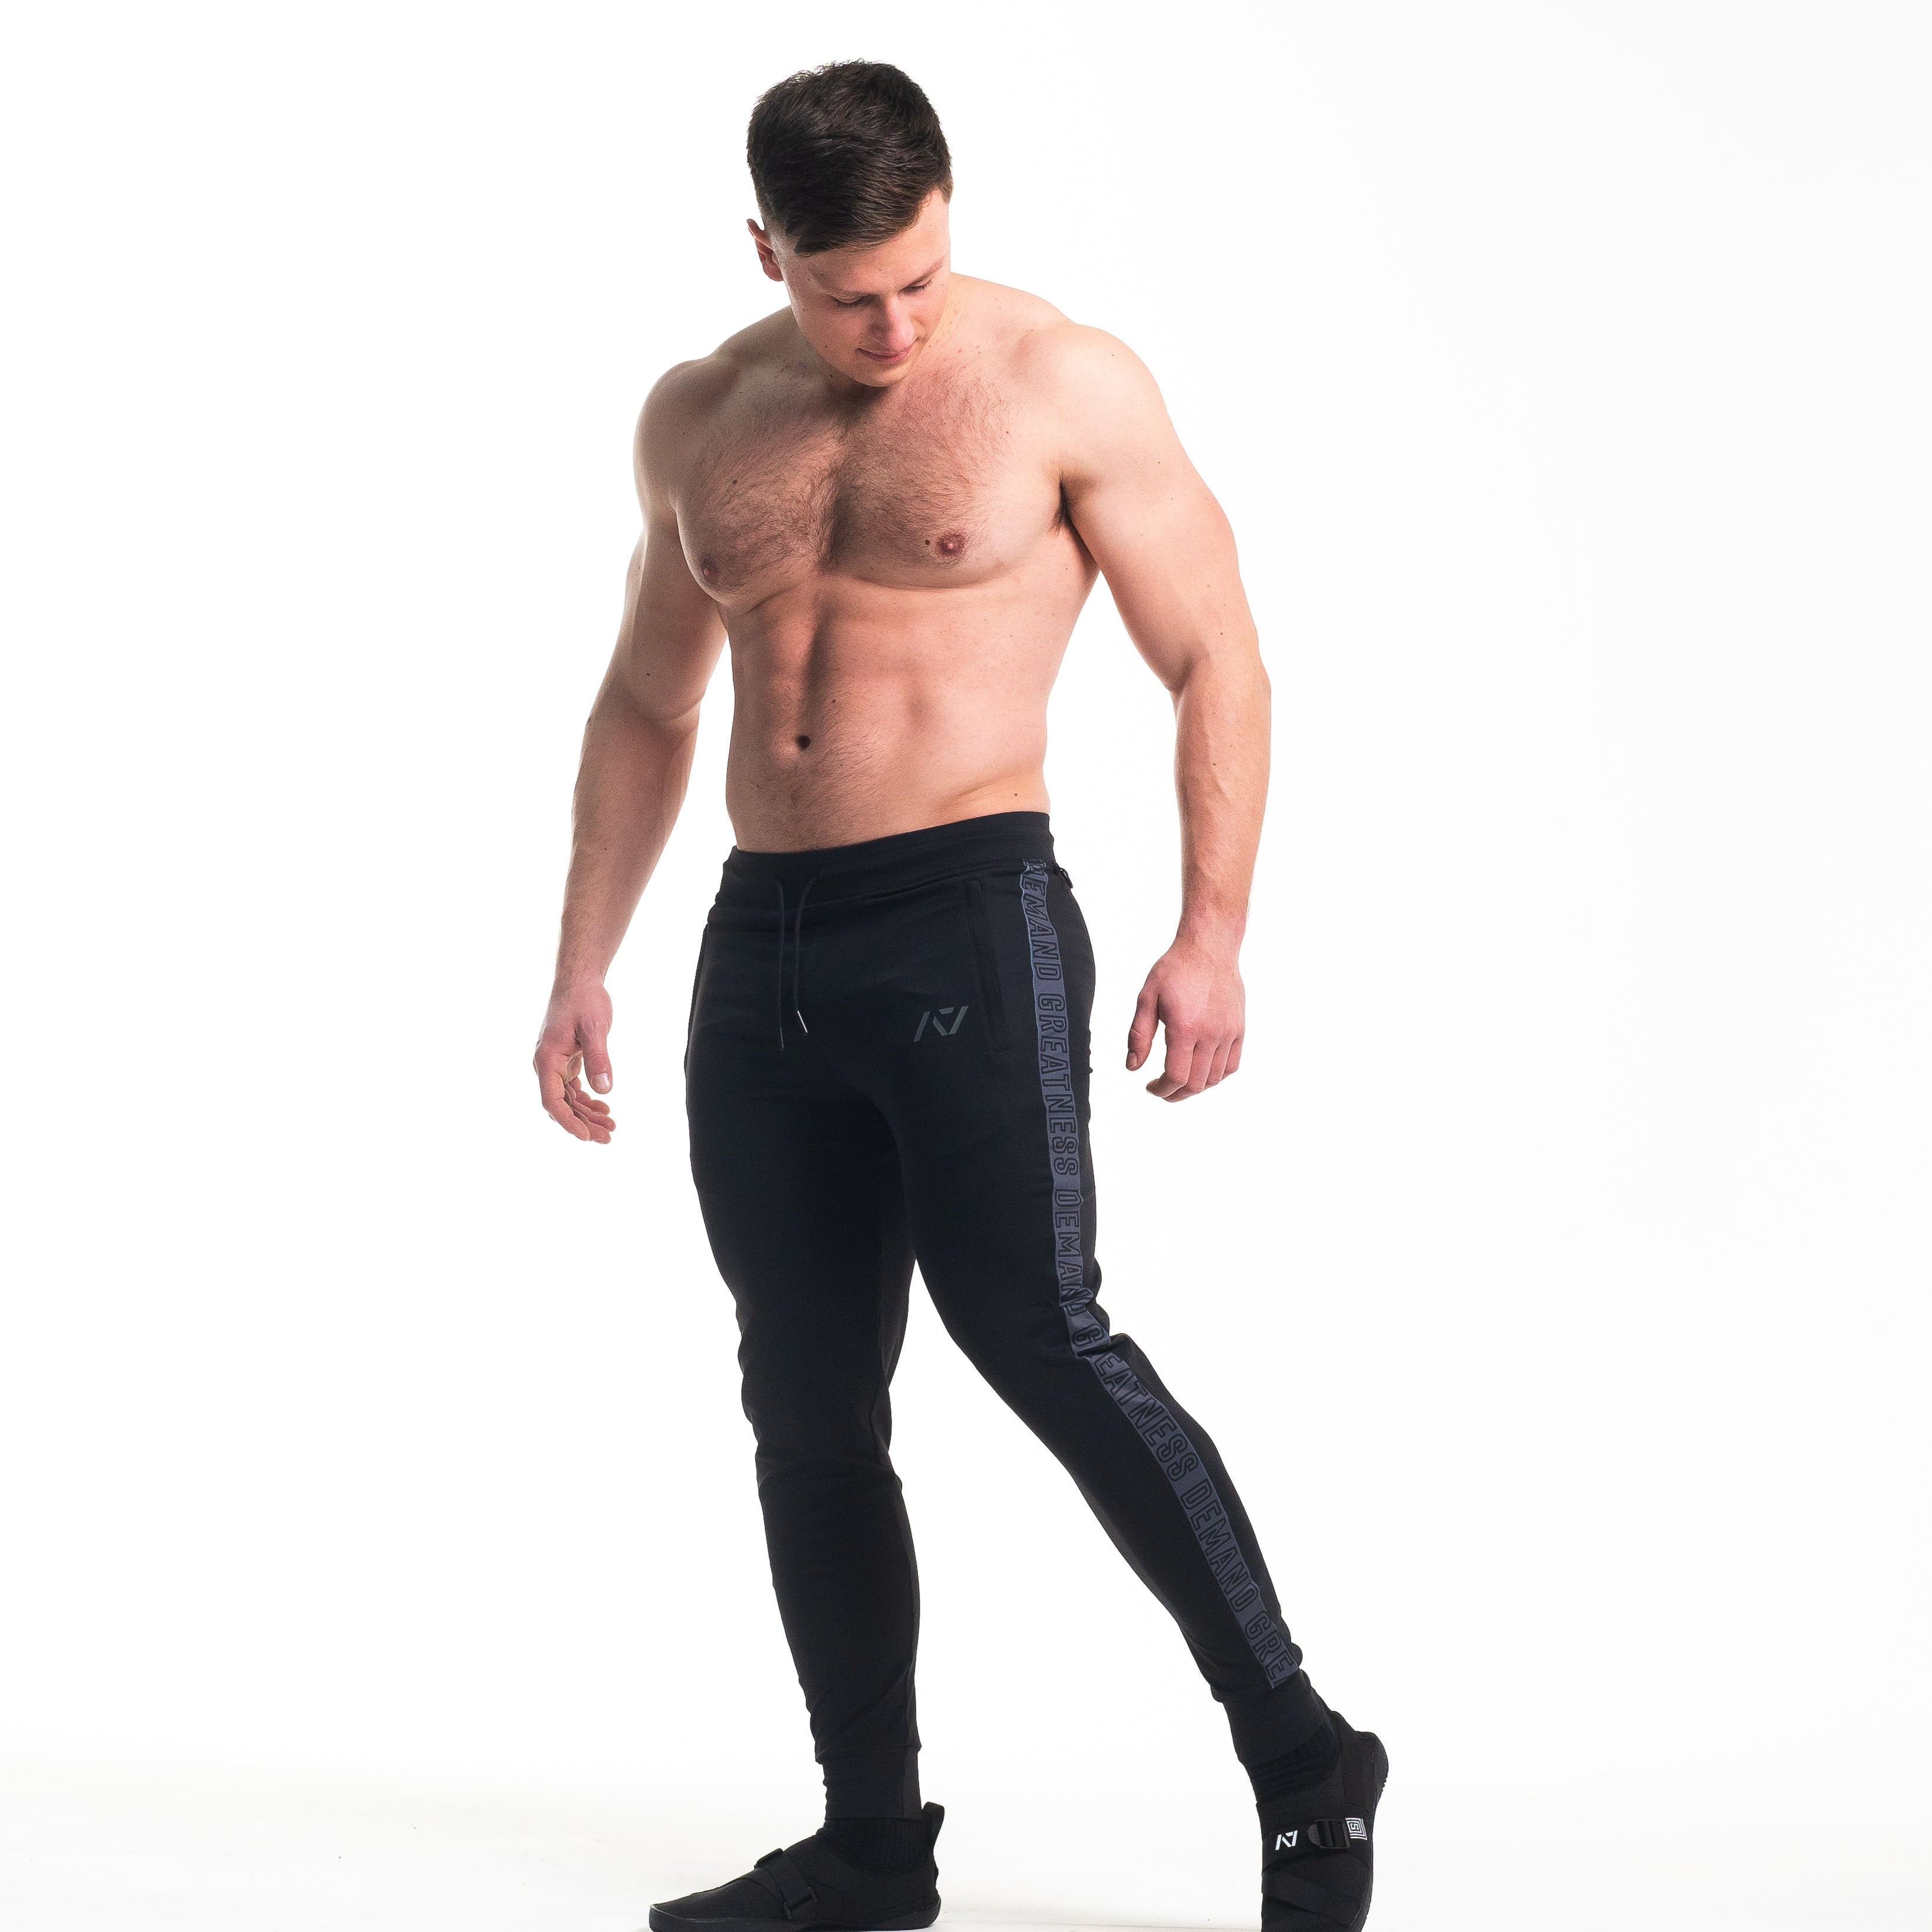 A7 Shadow Stone Defy joggers are just as comfortable in the gym as they are going out. These are made with premium moisture-wicking 4-way-stretch material for greater range of motion. These are a great fit for both men and women. All A7 Powerlifting Equipment shipping to UK, Norway, Switzerland and Iceland.